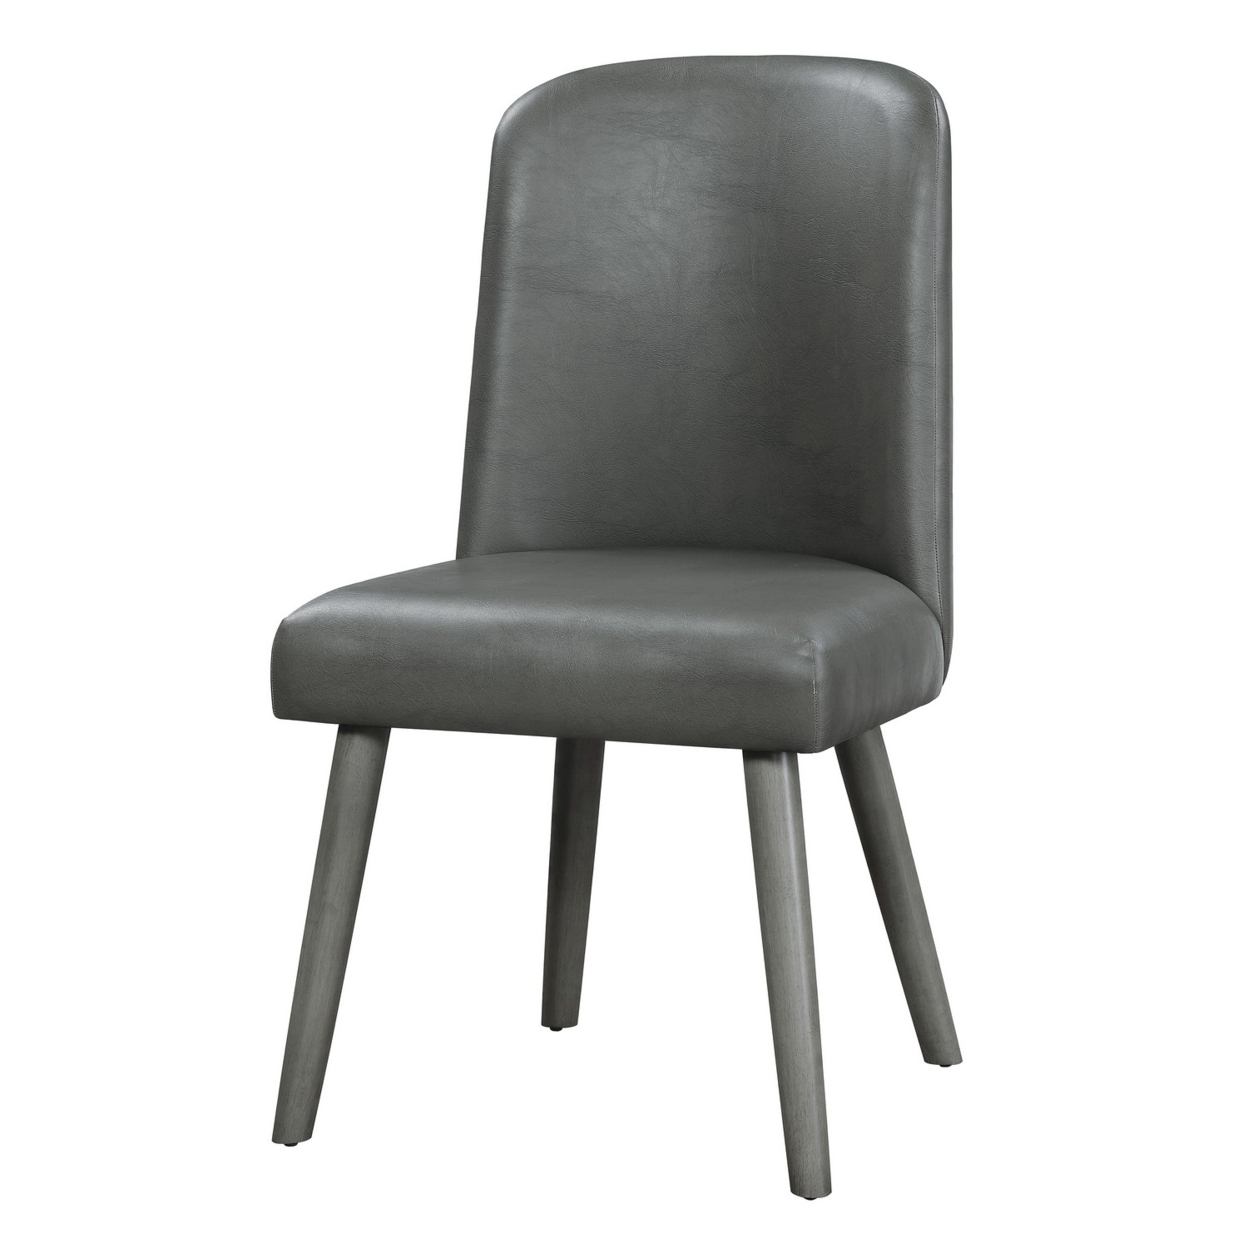 Leatherette Dining Chair With Splayed Wooden Legs, Set Of 2, Gray- Saltoro Sherpi